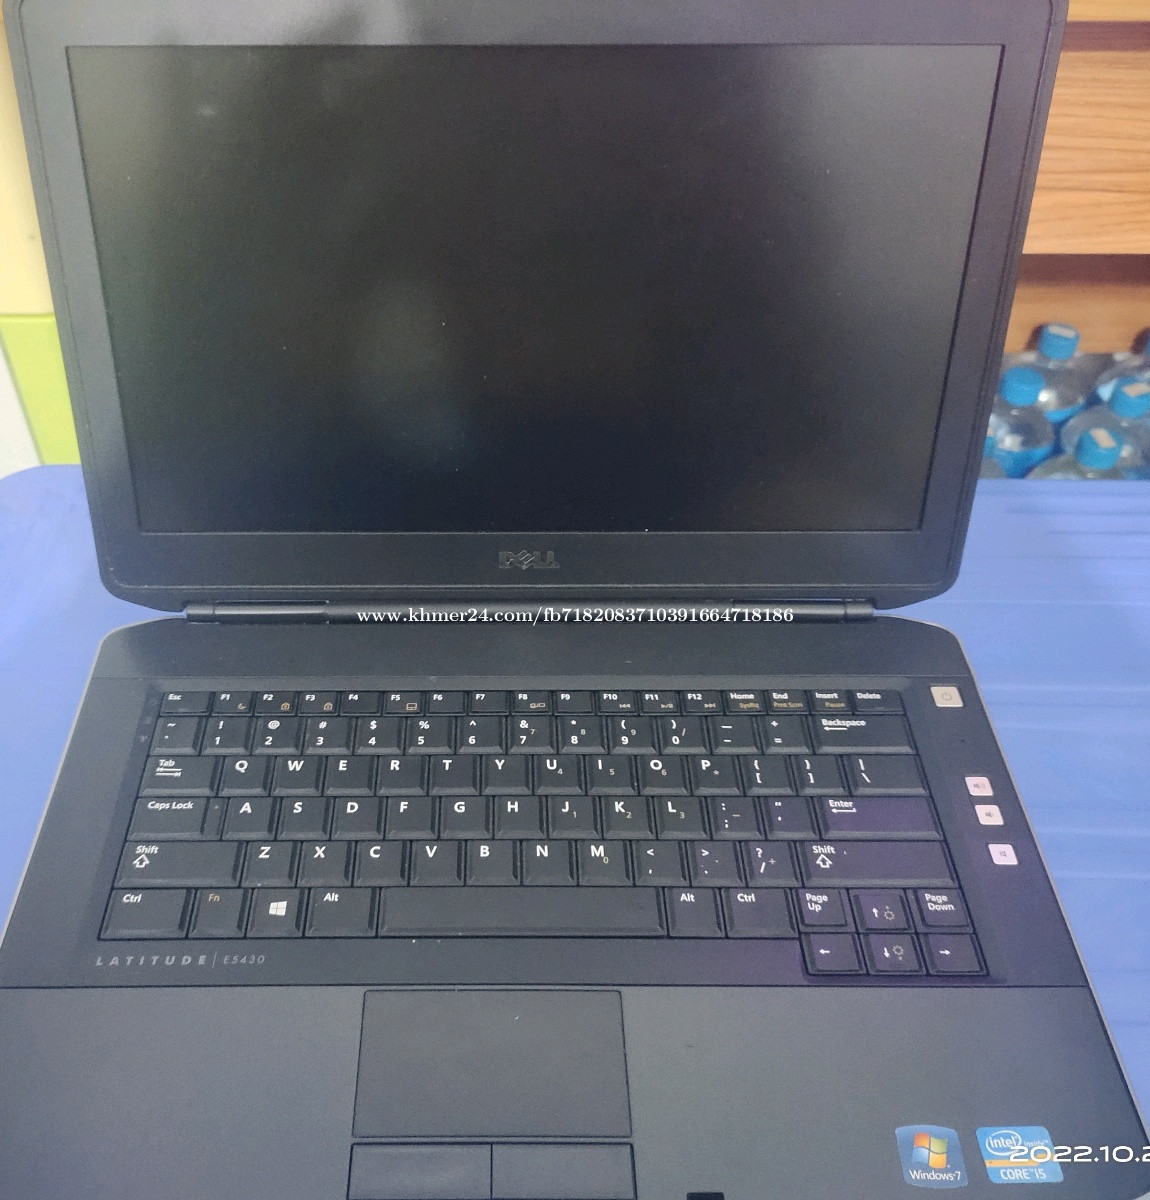 Sell Laptop Dell Latitude Price $130 in Siem Reap, Cambodia - ពិទូ សែ |  